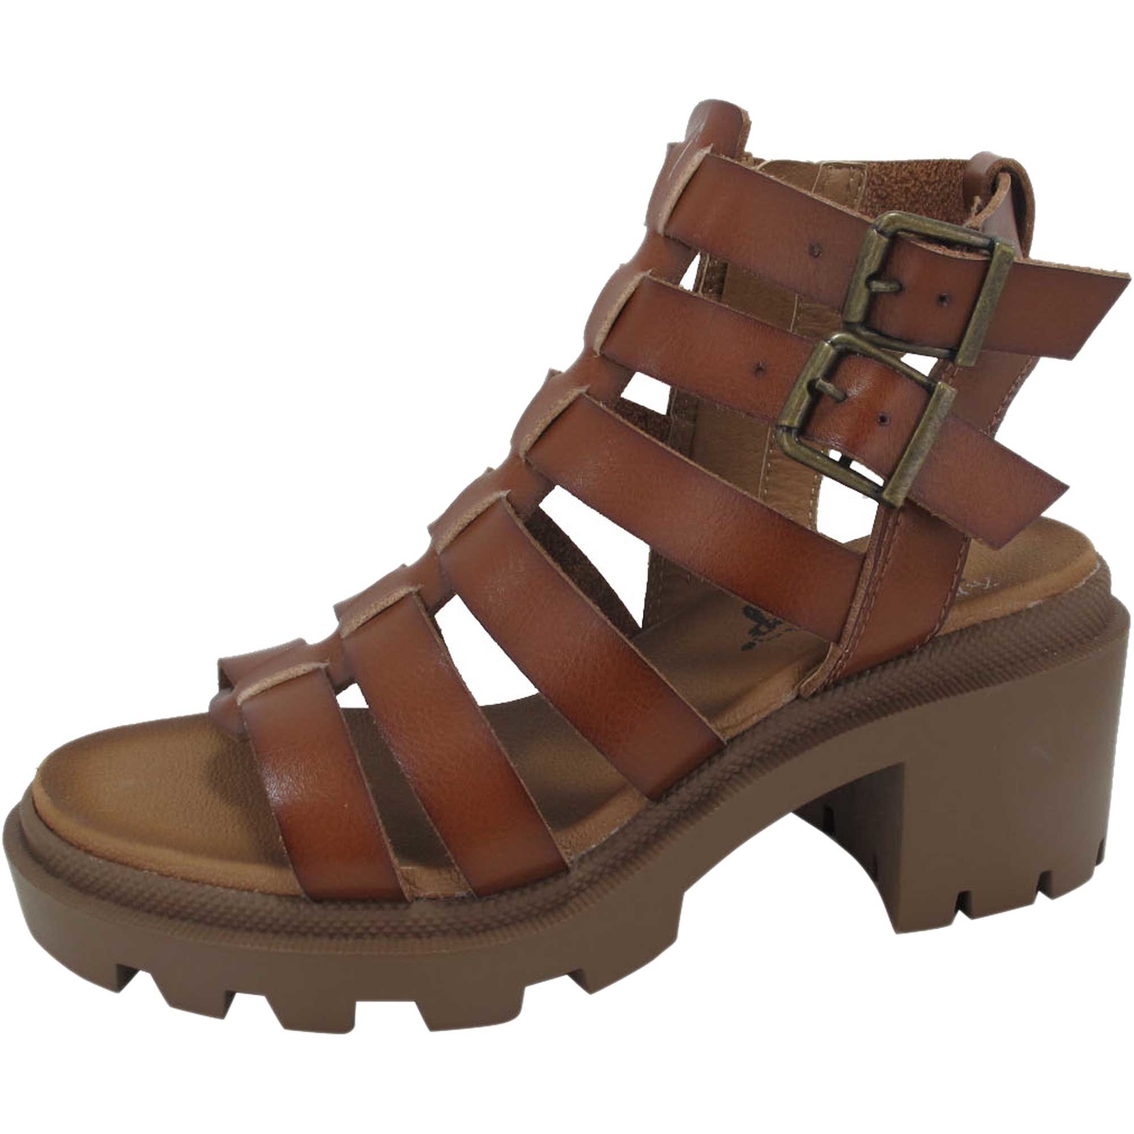 Jellypop Shoes Remy Gladiator Sandals | Low-heel | Shoes | Shop The ...